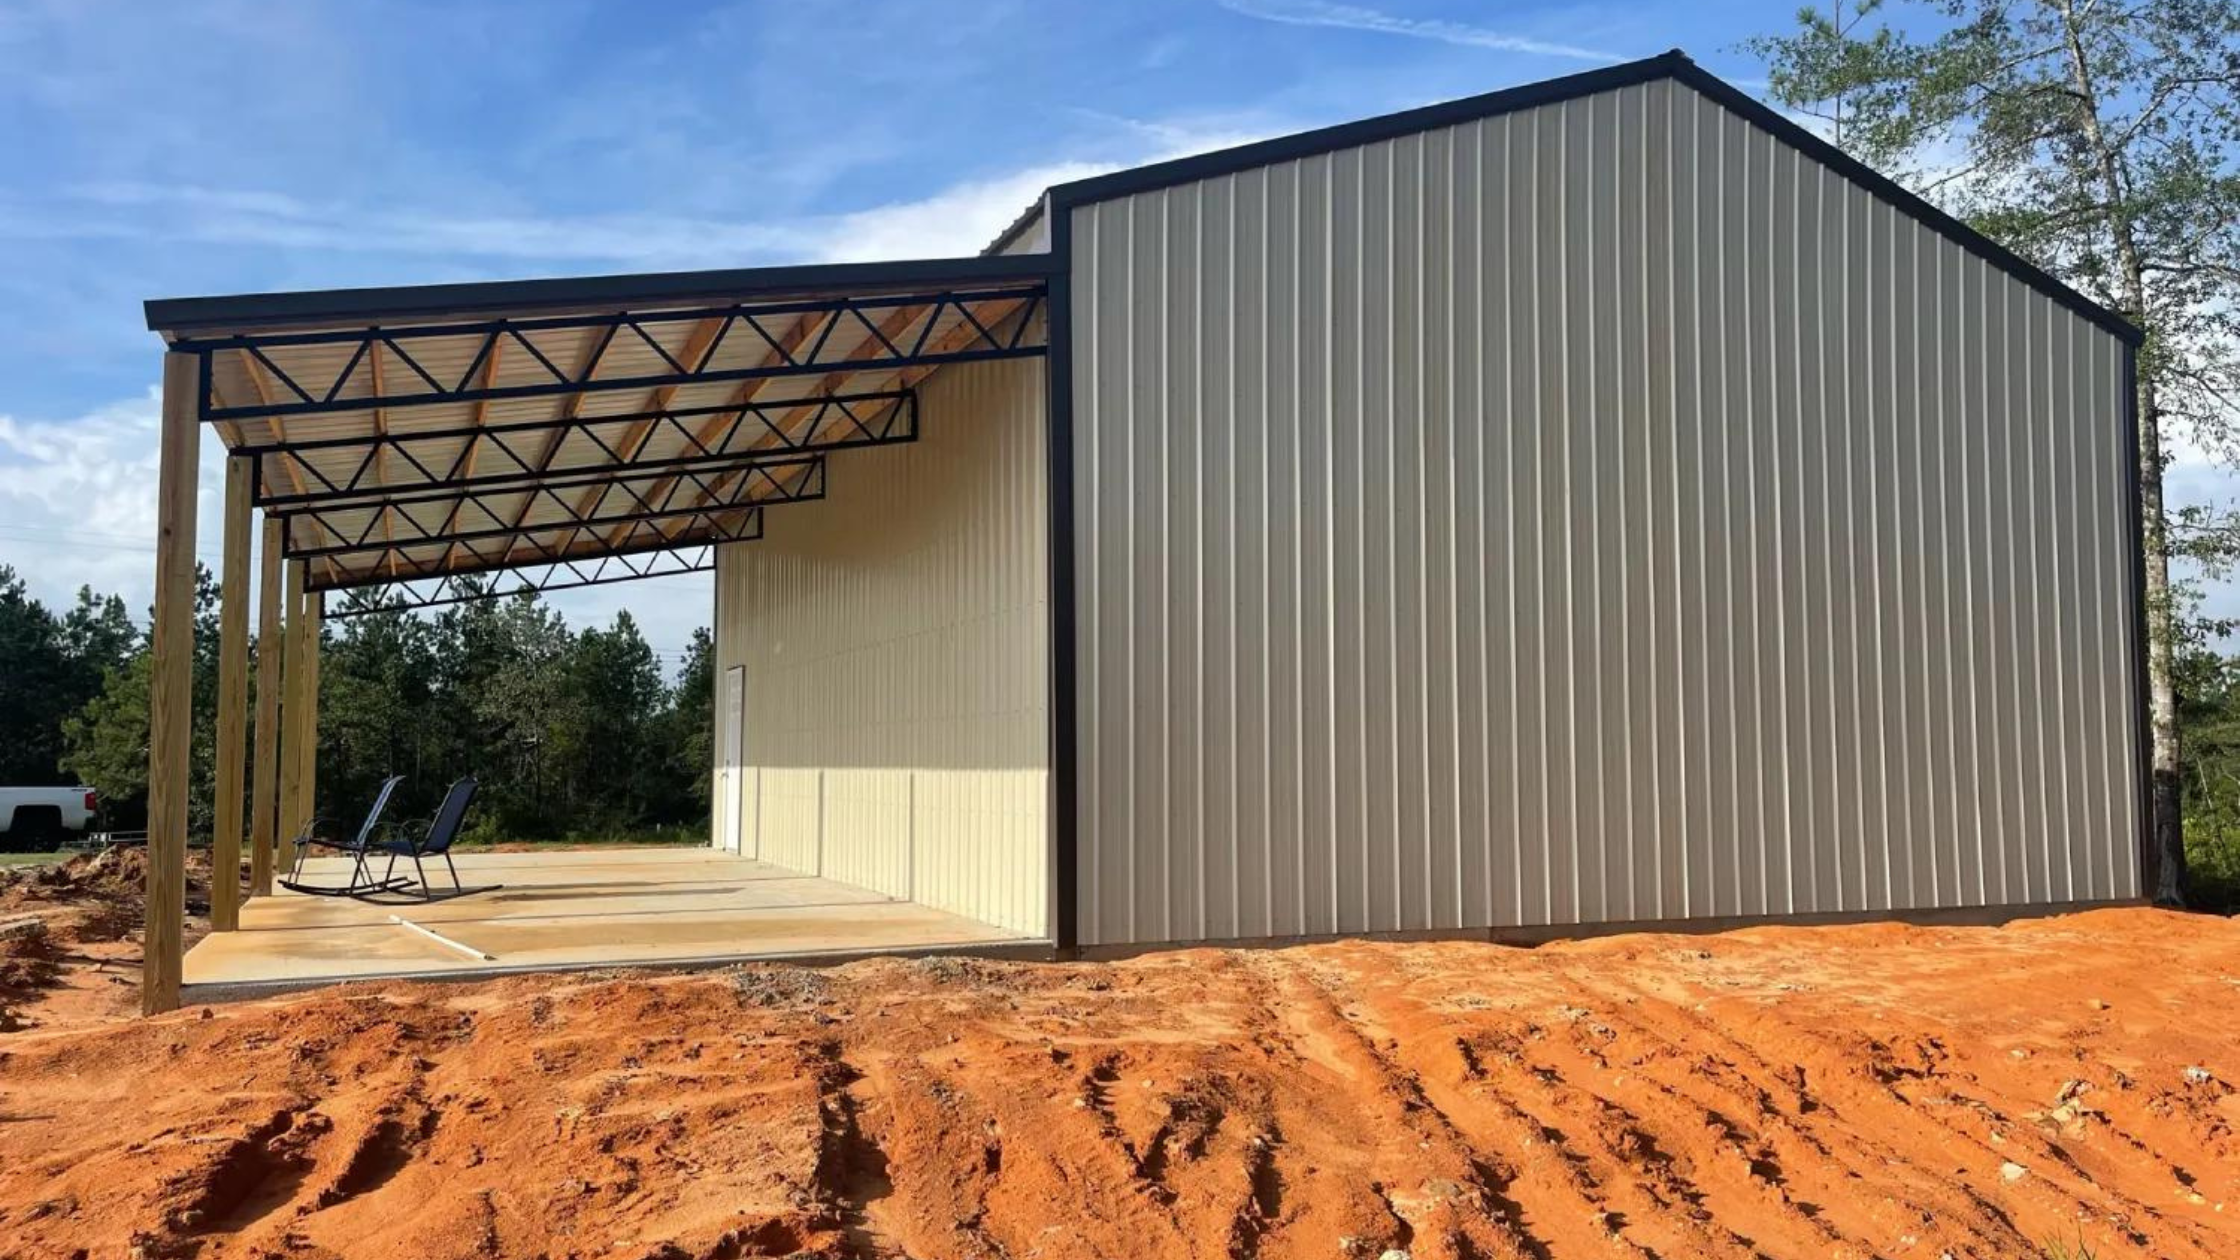 Why Choose Apex for Your Next Pole Barn Project